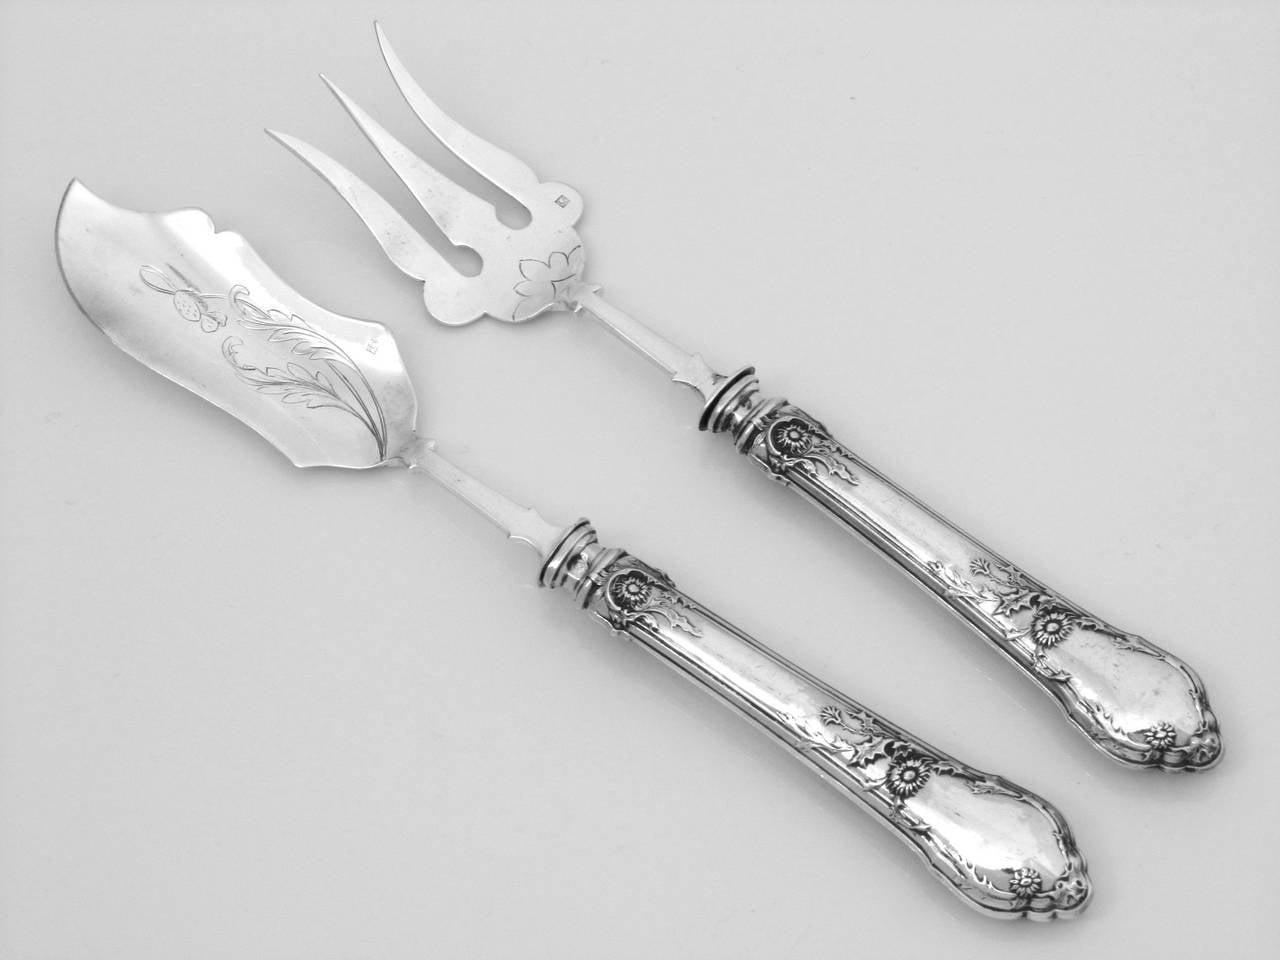 Gorgeous French Sterling Silver Dessert/Hors d'Oeuvre Set 4 pc Art Nouveau For Sale 1